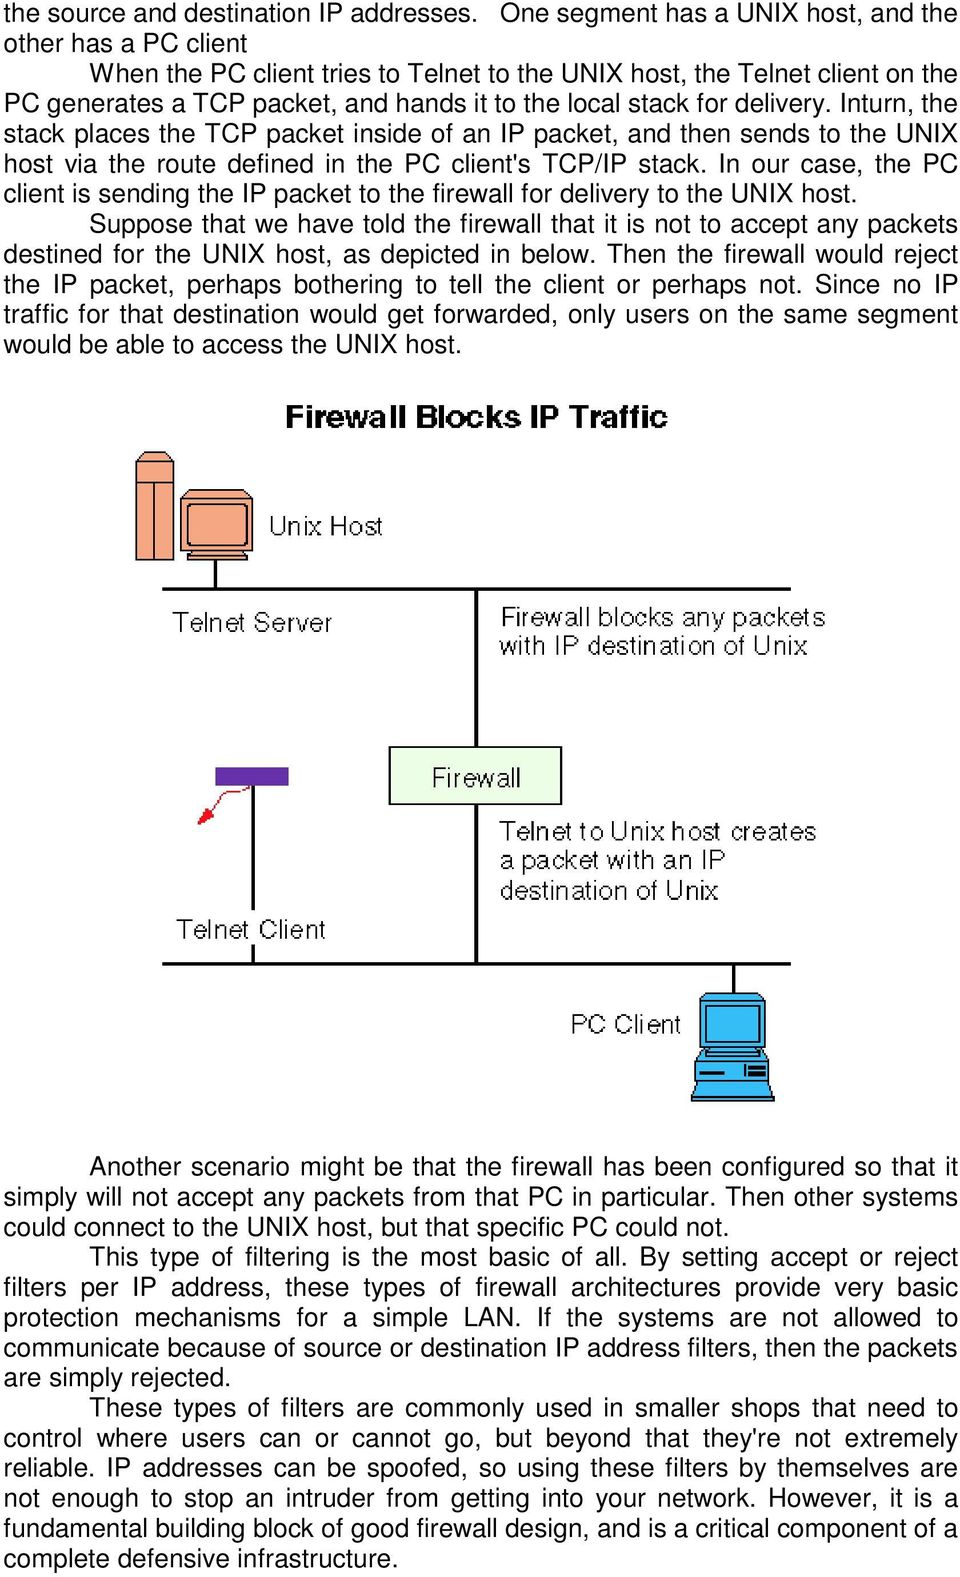 delivery. Inturn, the stack places the TCP packet inside of an IP packet, and then sends to the UNIX host via the route defined in the PC client's TCP/IP stack.